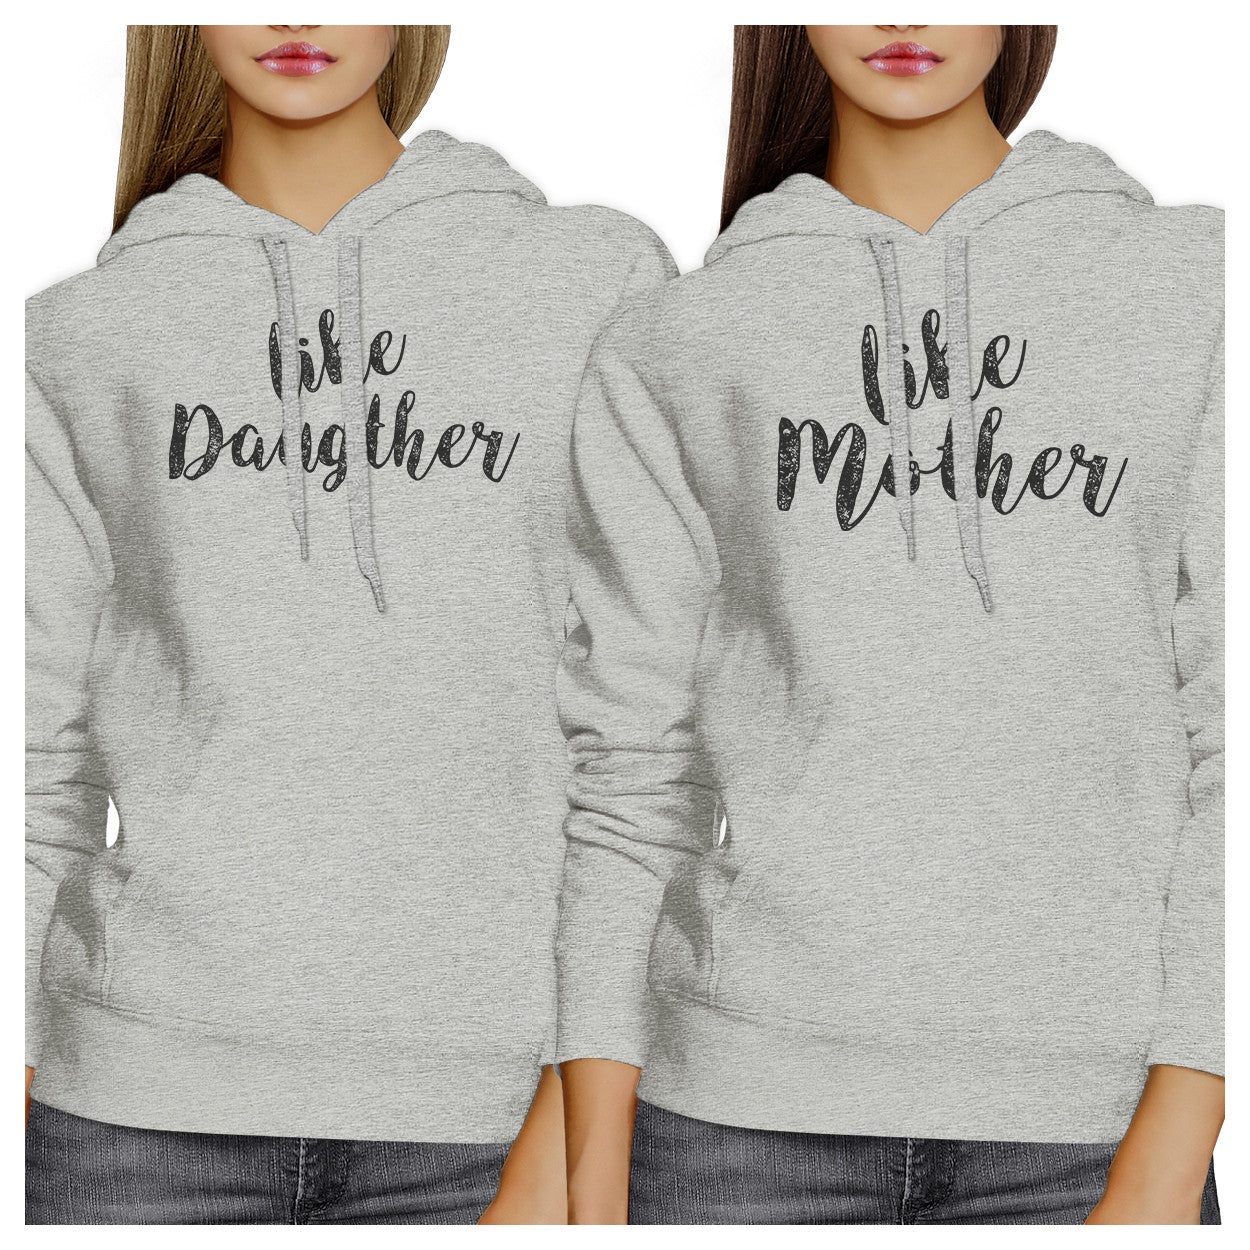 matching hoodies for mom and daughter